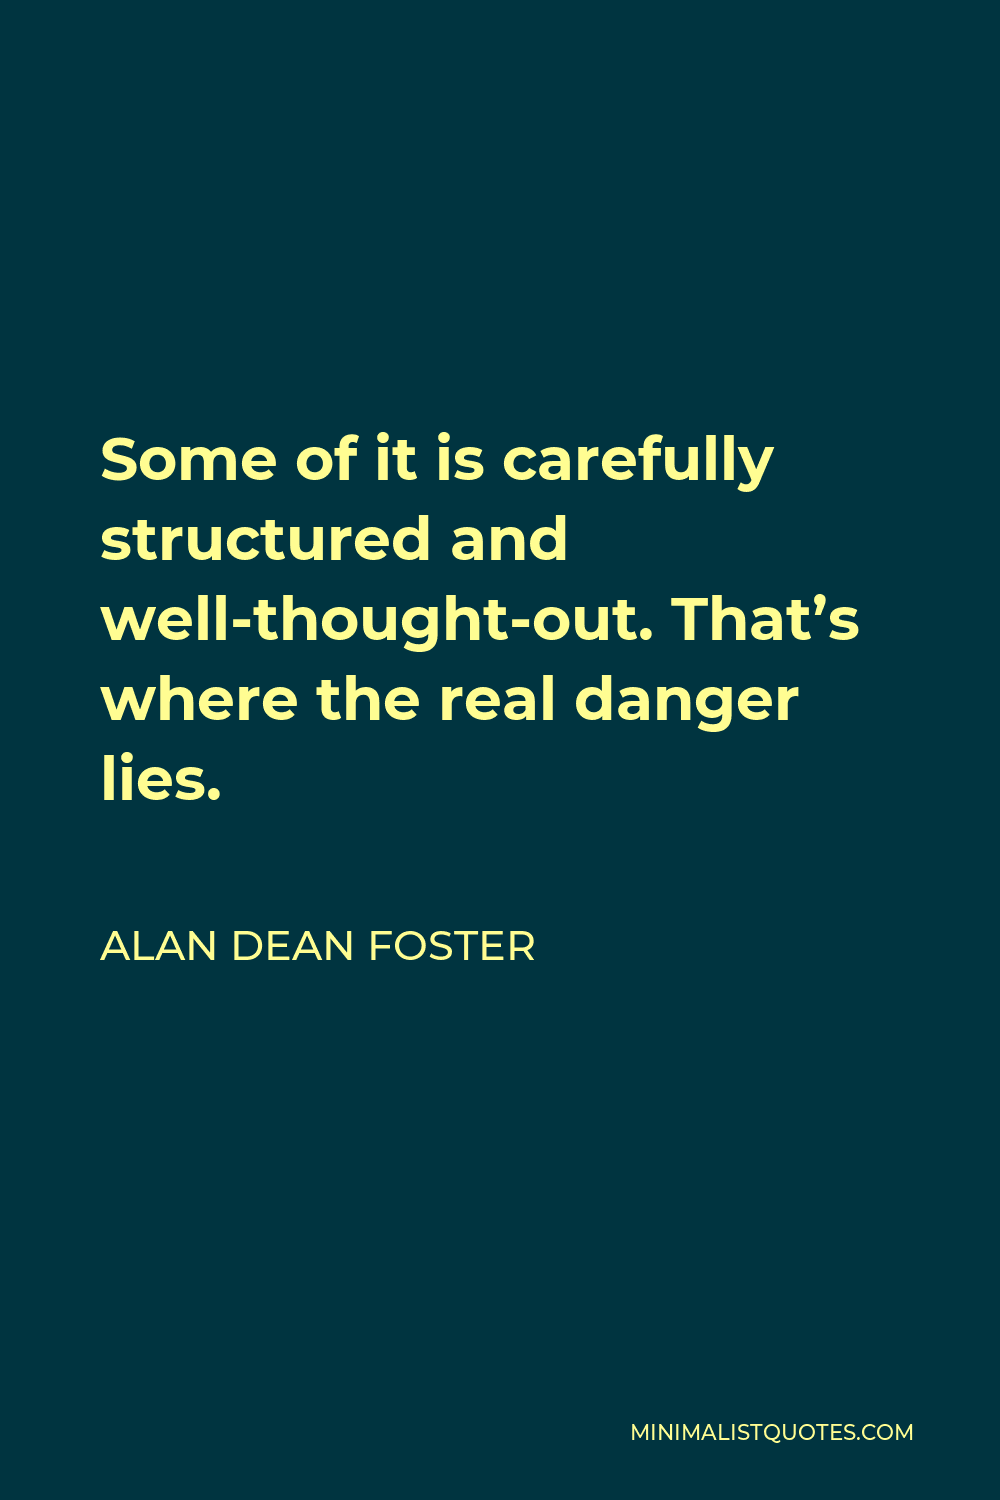 Alan Dean Foster Quote - Some of it is carefully structured and well-thought-out. That’s where the real danger lies.